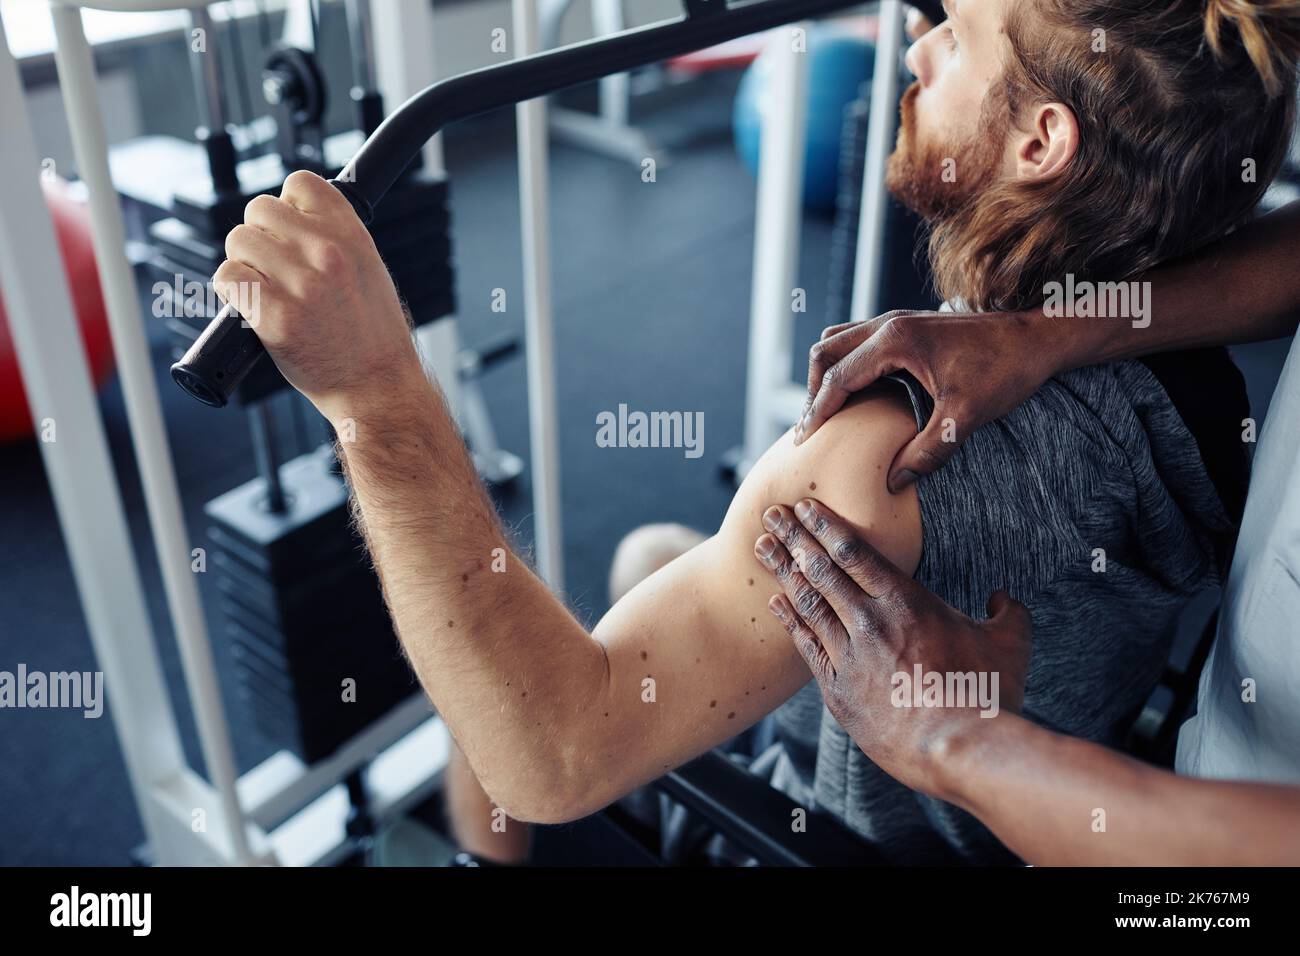 Young patient training his injury arm on exercise equipment in gym while therapist massaging it Stock Photo